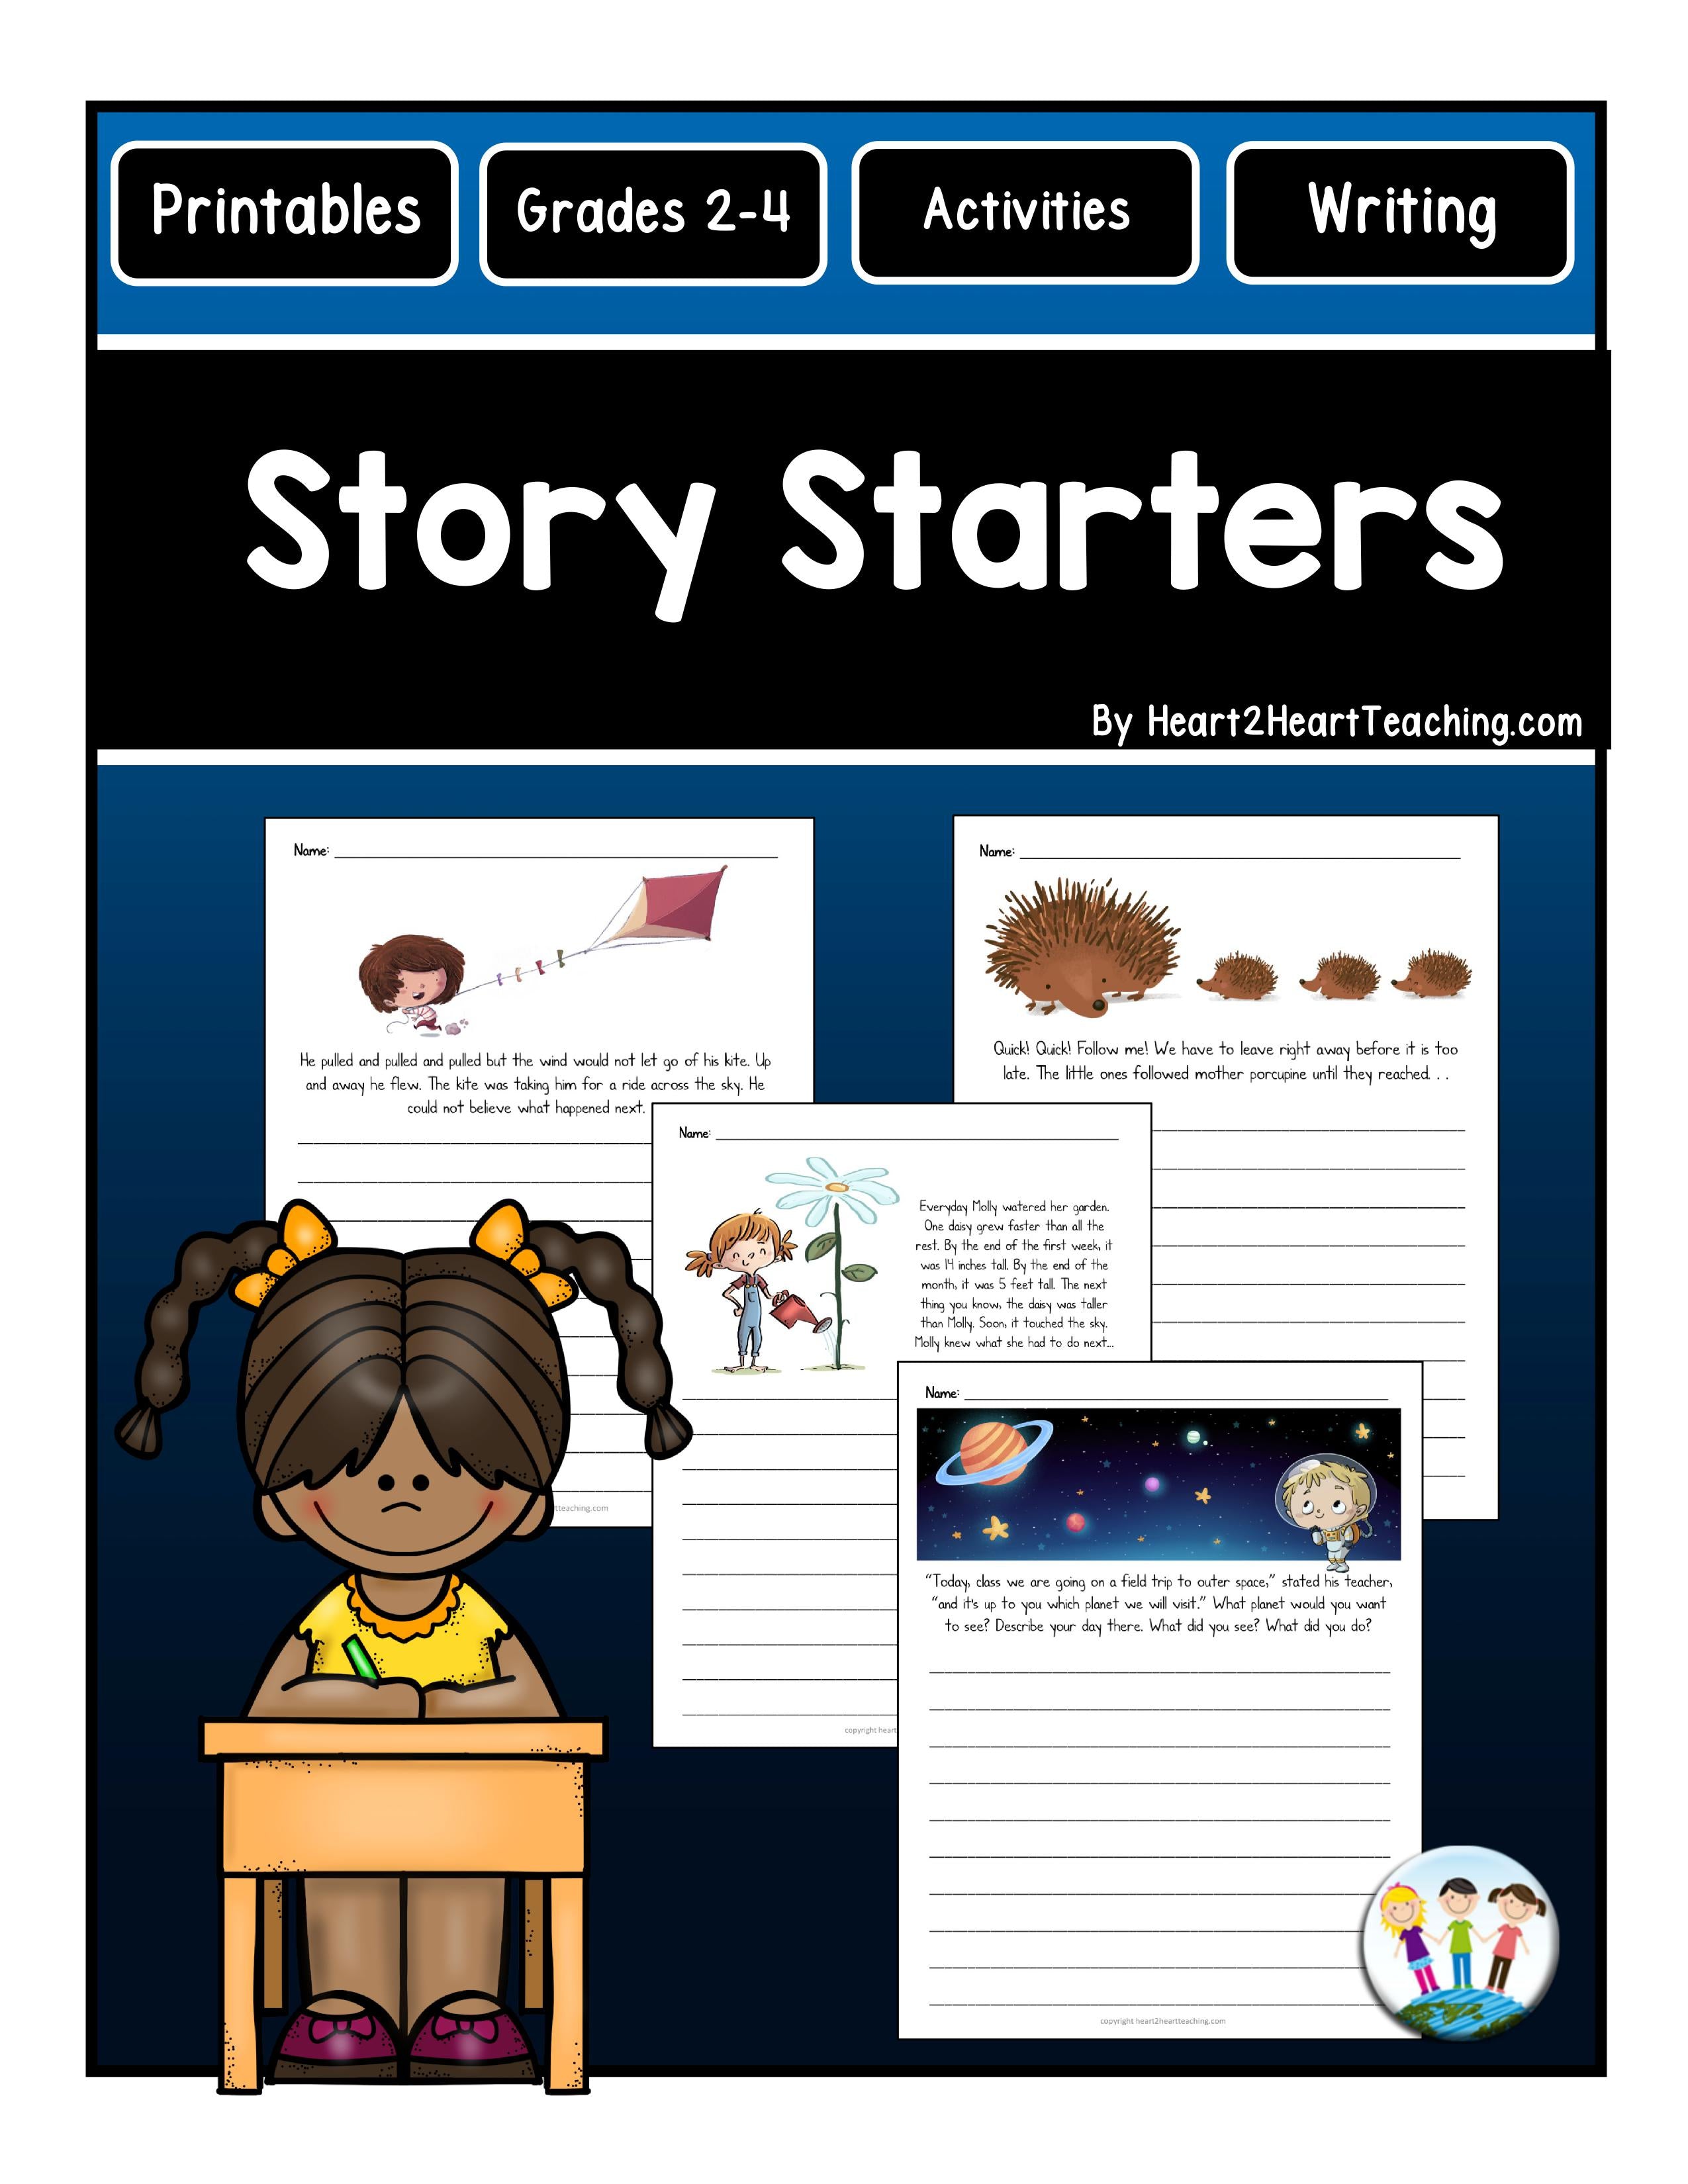 Story Starters and Writing Prompts for Creative Writing